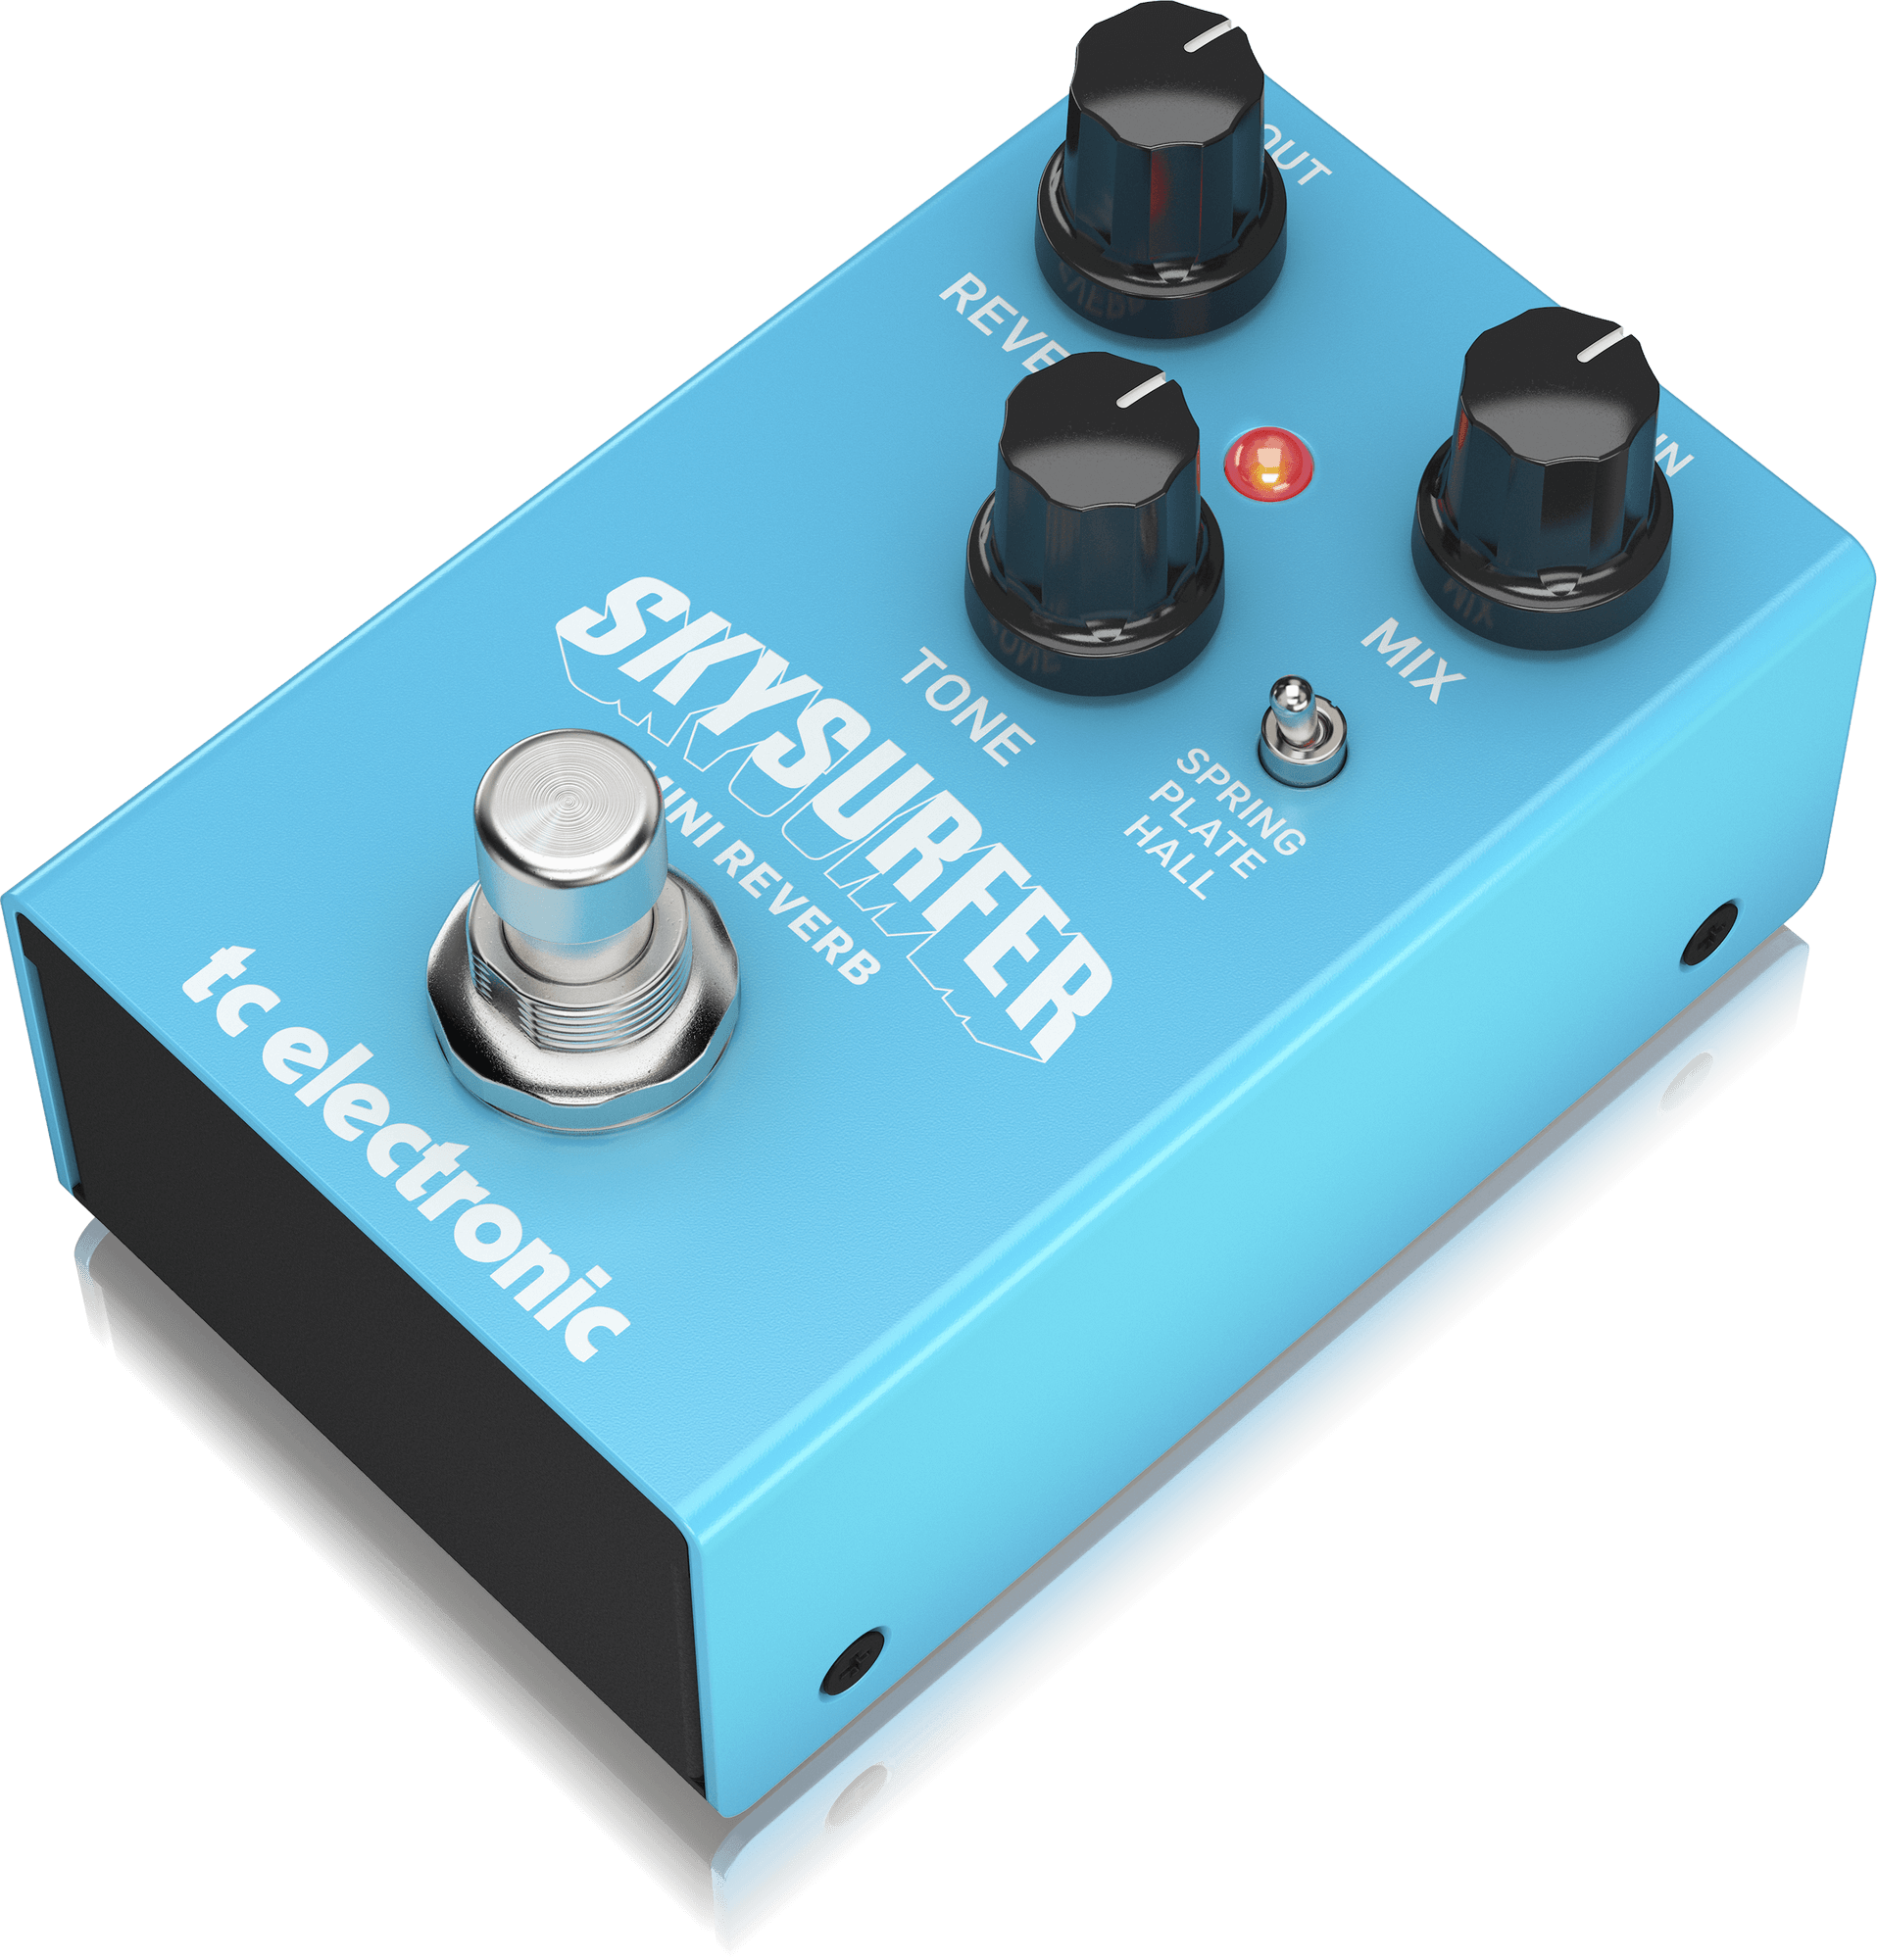 TC Electronic Sky Surfer Mini Reverb Studio-quality Reverb With 3 Award Winning Tc Electronic Algorithms, Now With A Compact Footprint, TC ELECTRONIC, EFFECTS, tc-electronic-effects-tc-sky-surfer-mini-reverb, ZOSO MUSIC SDN BHD